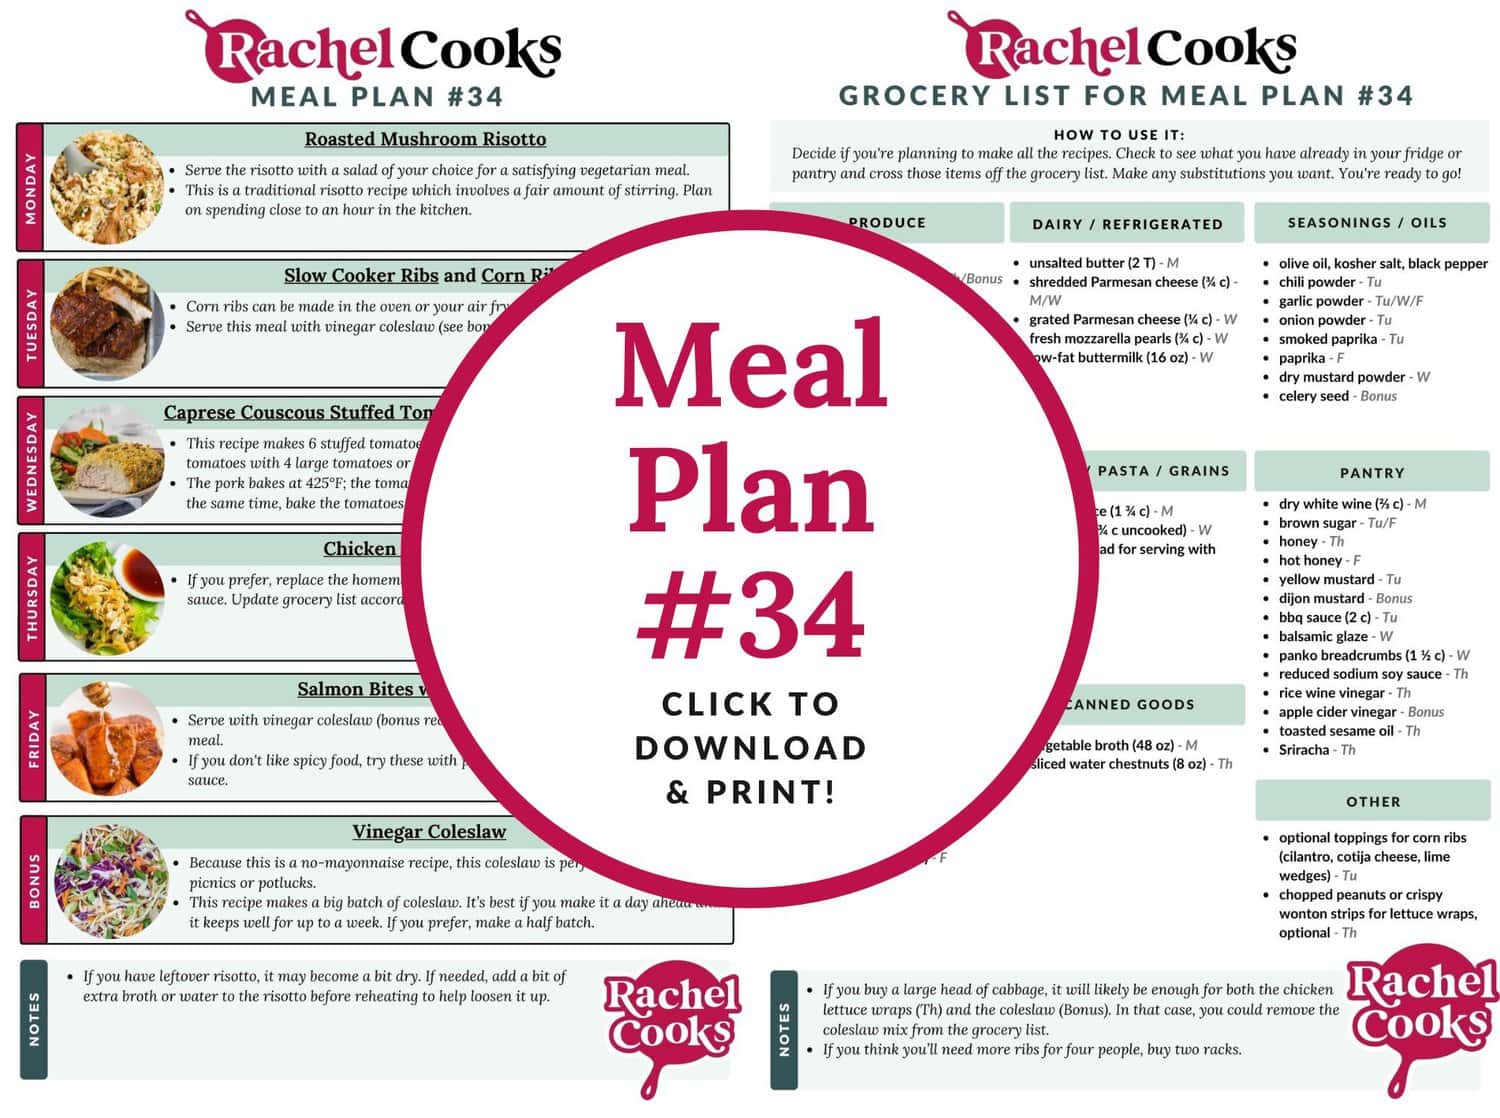 Meal plan 34 preview image.